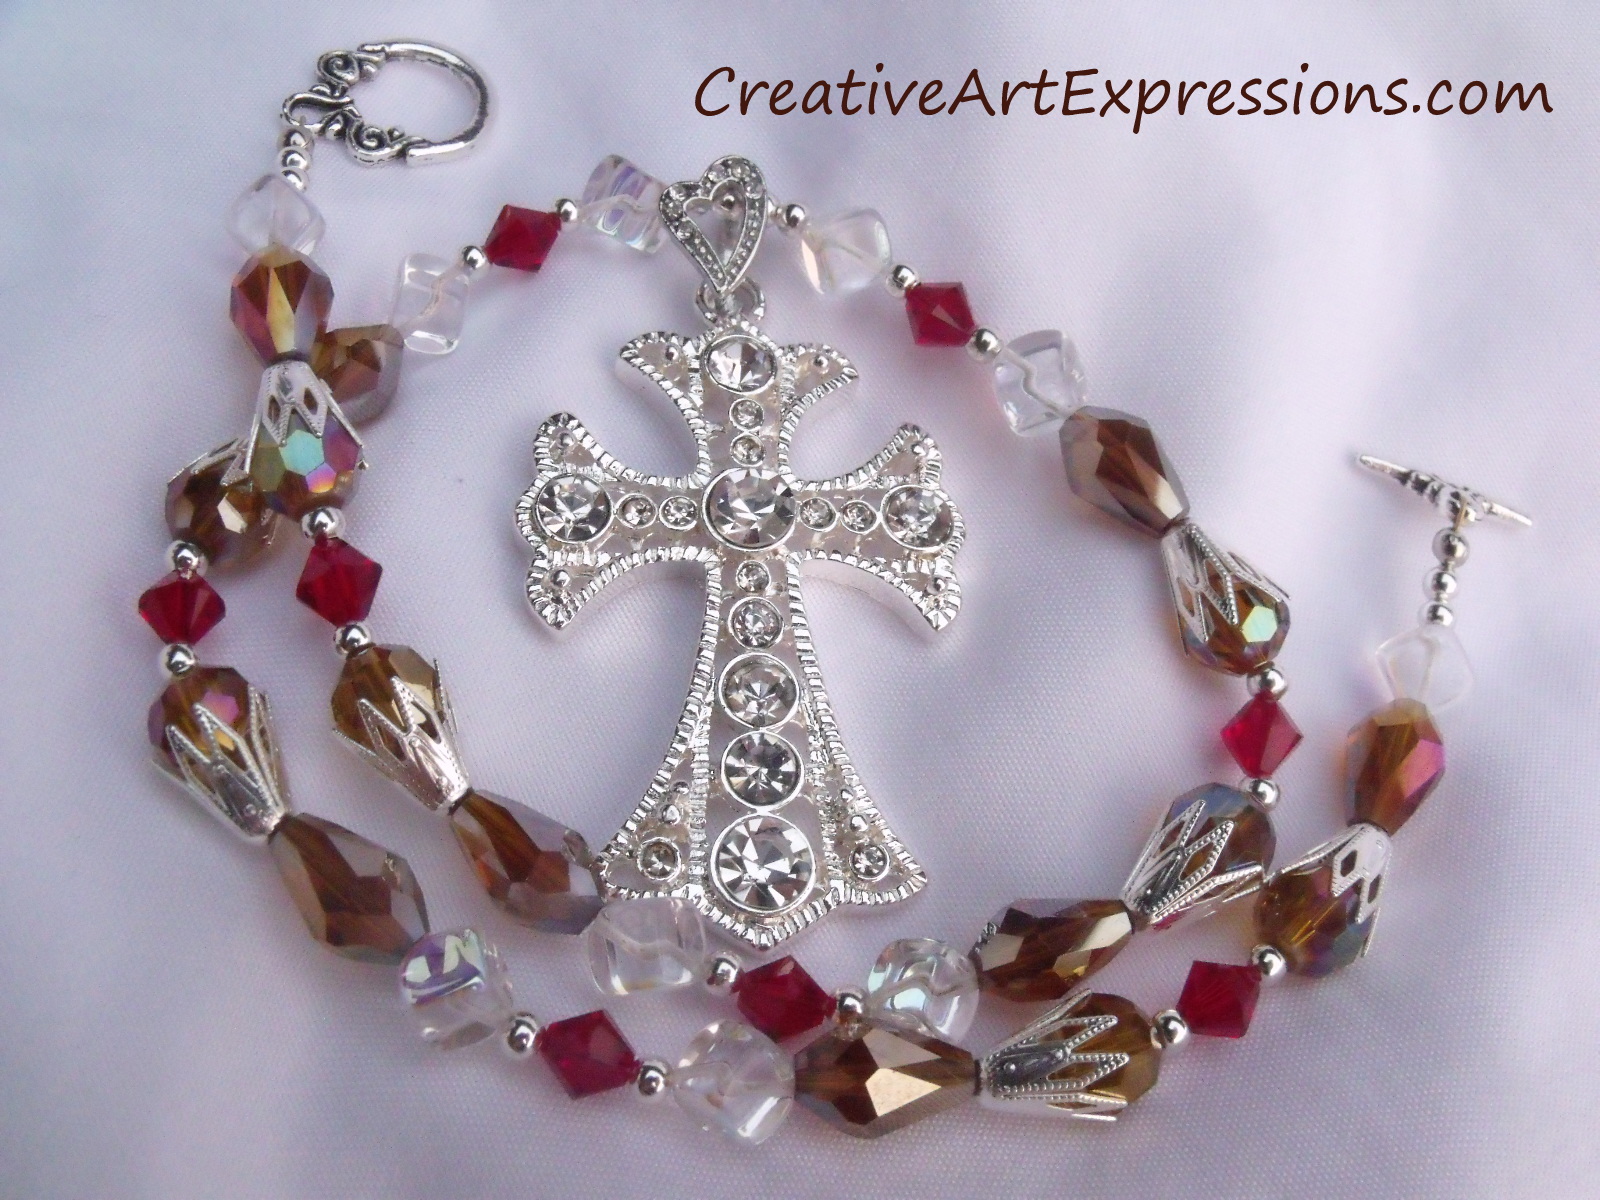 Creative Art Expressions Handmade Red Gold & Bright Silver Cross Necklace Jewelry Design